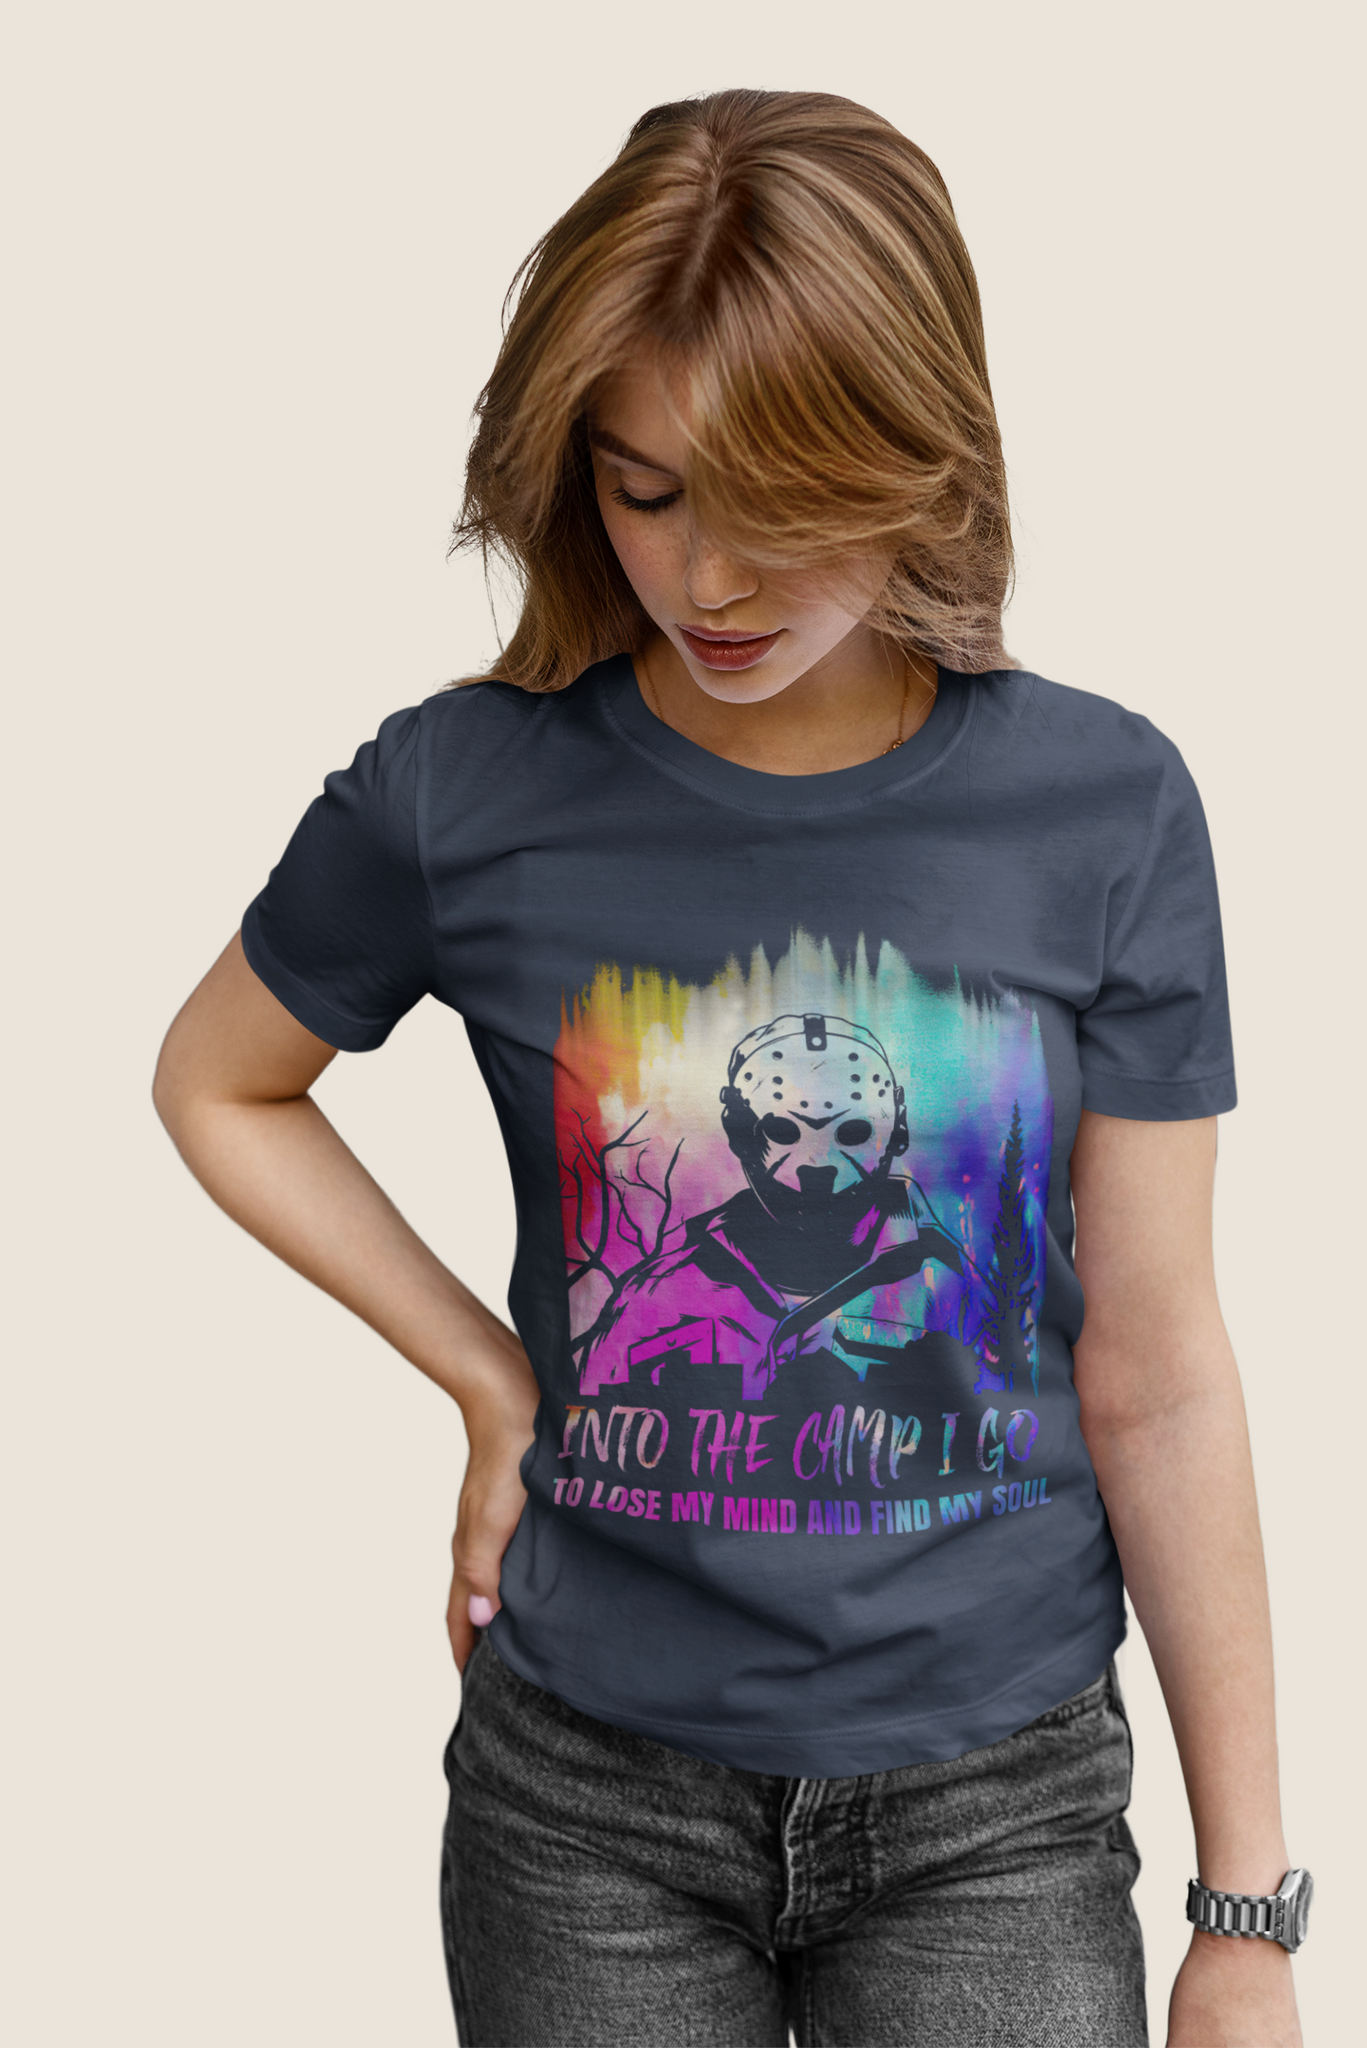 Friday 13th T Shirt, Jason Voorhees T Shirt, Into The Camp I Go T Shirt, Halloween Gifts